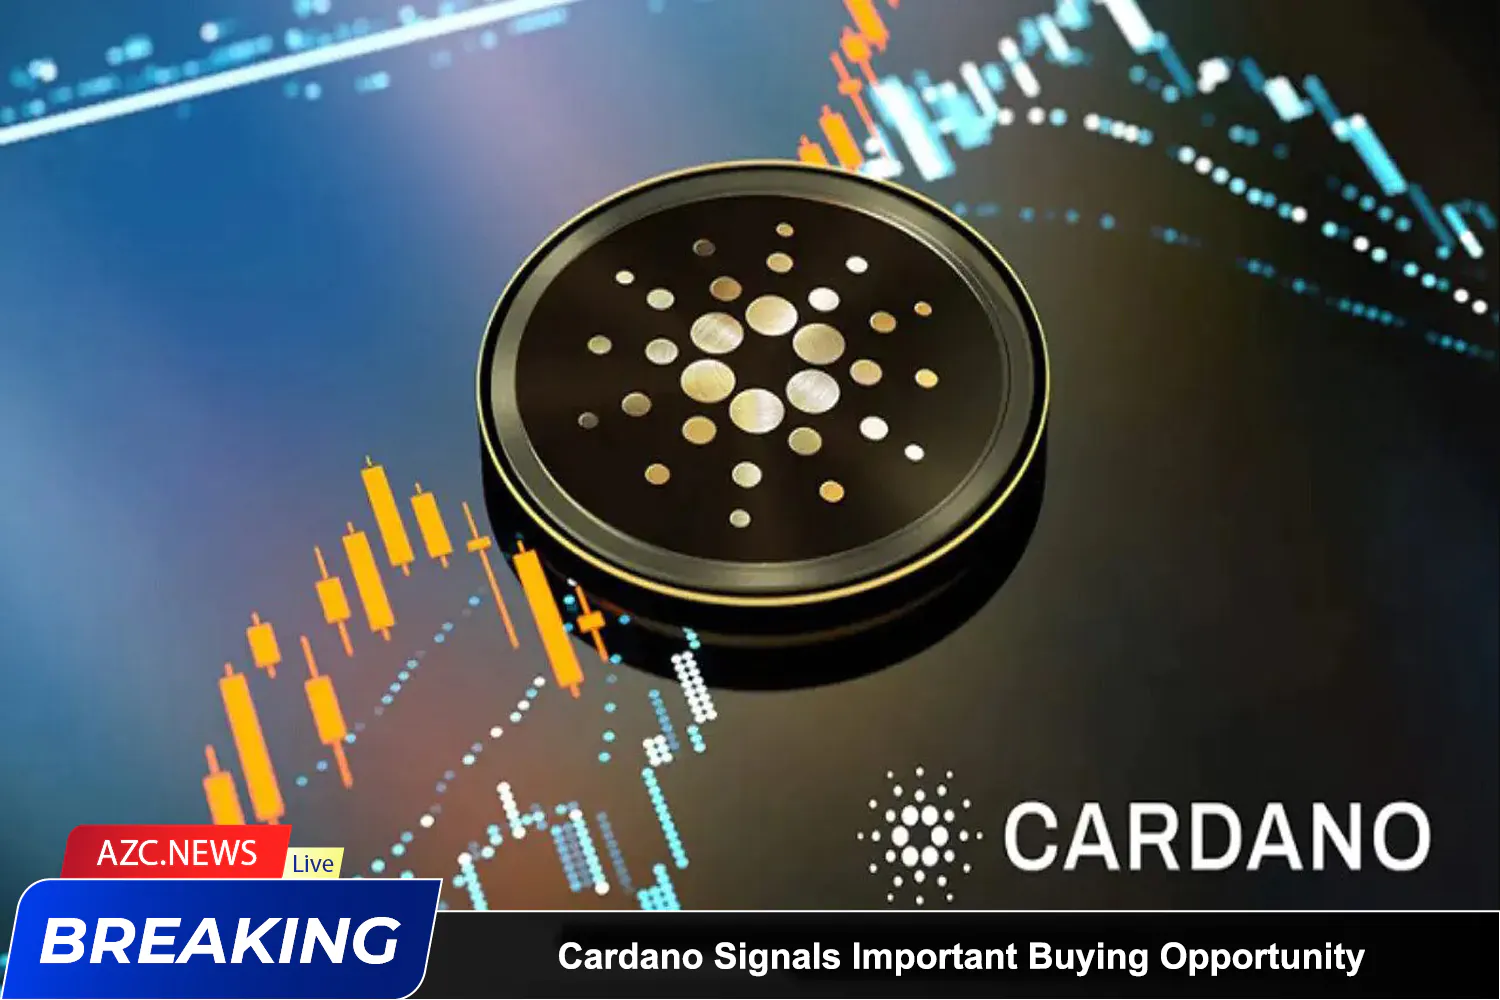 Azcnews Cardano Signals Important Buying Opportunity